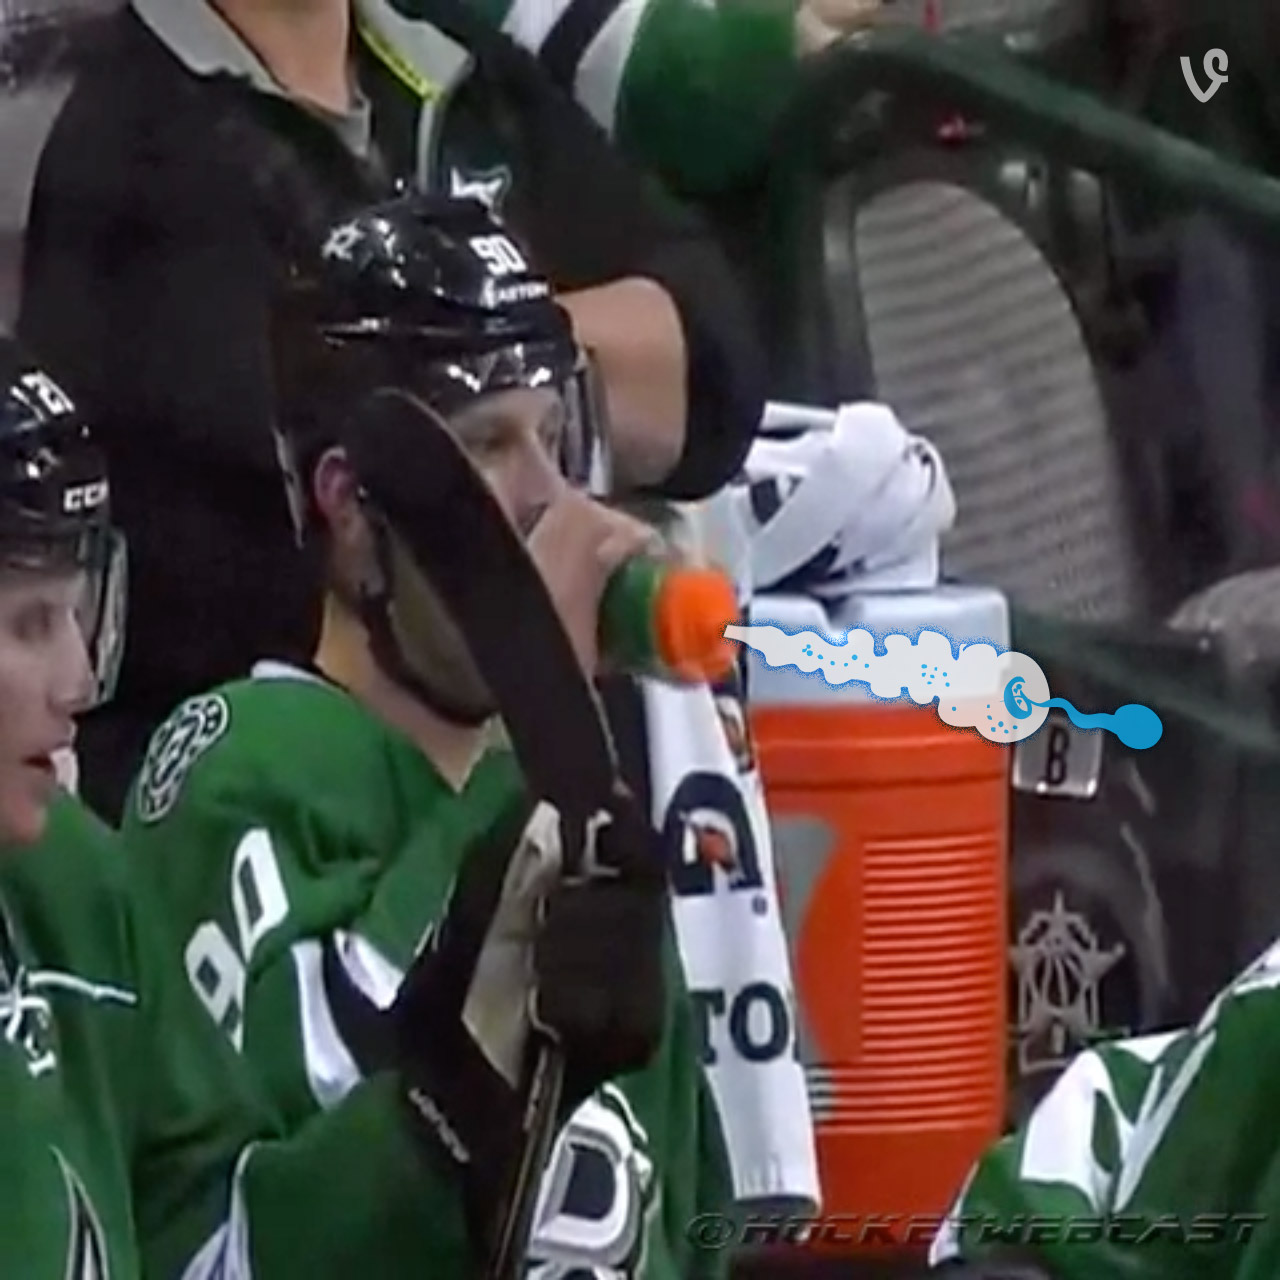 Dallas stars center Jason Spezza tries wrong end of water bottle